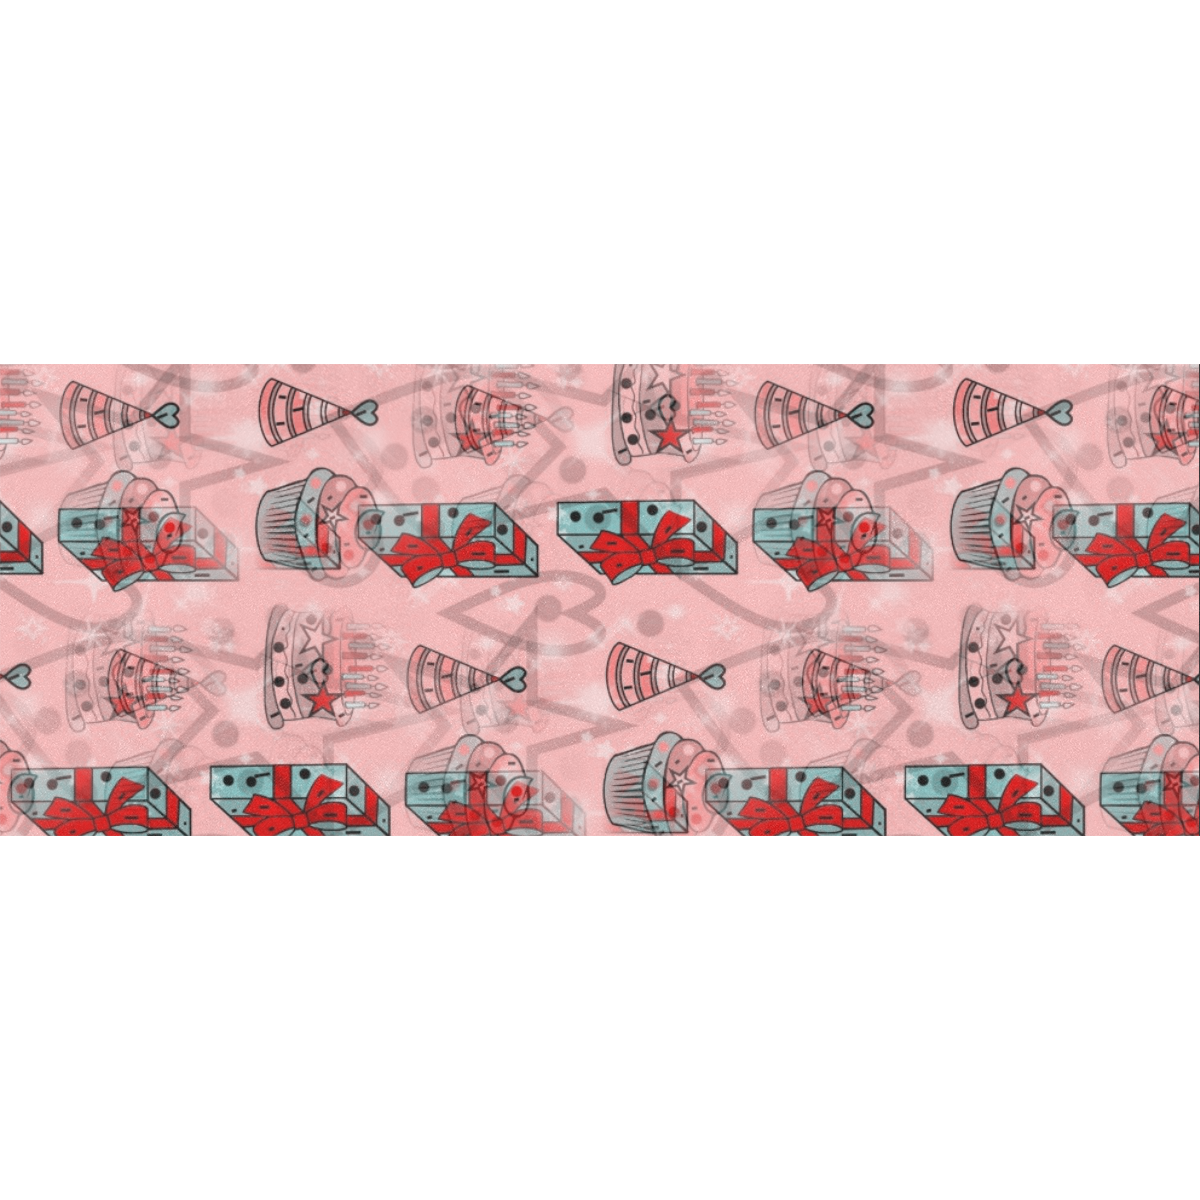 Birthday by Nico Bielow Gift Wrapping Paper 58"x 23" (1 Roll)